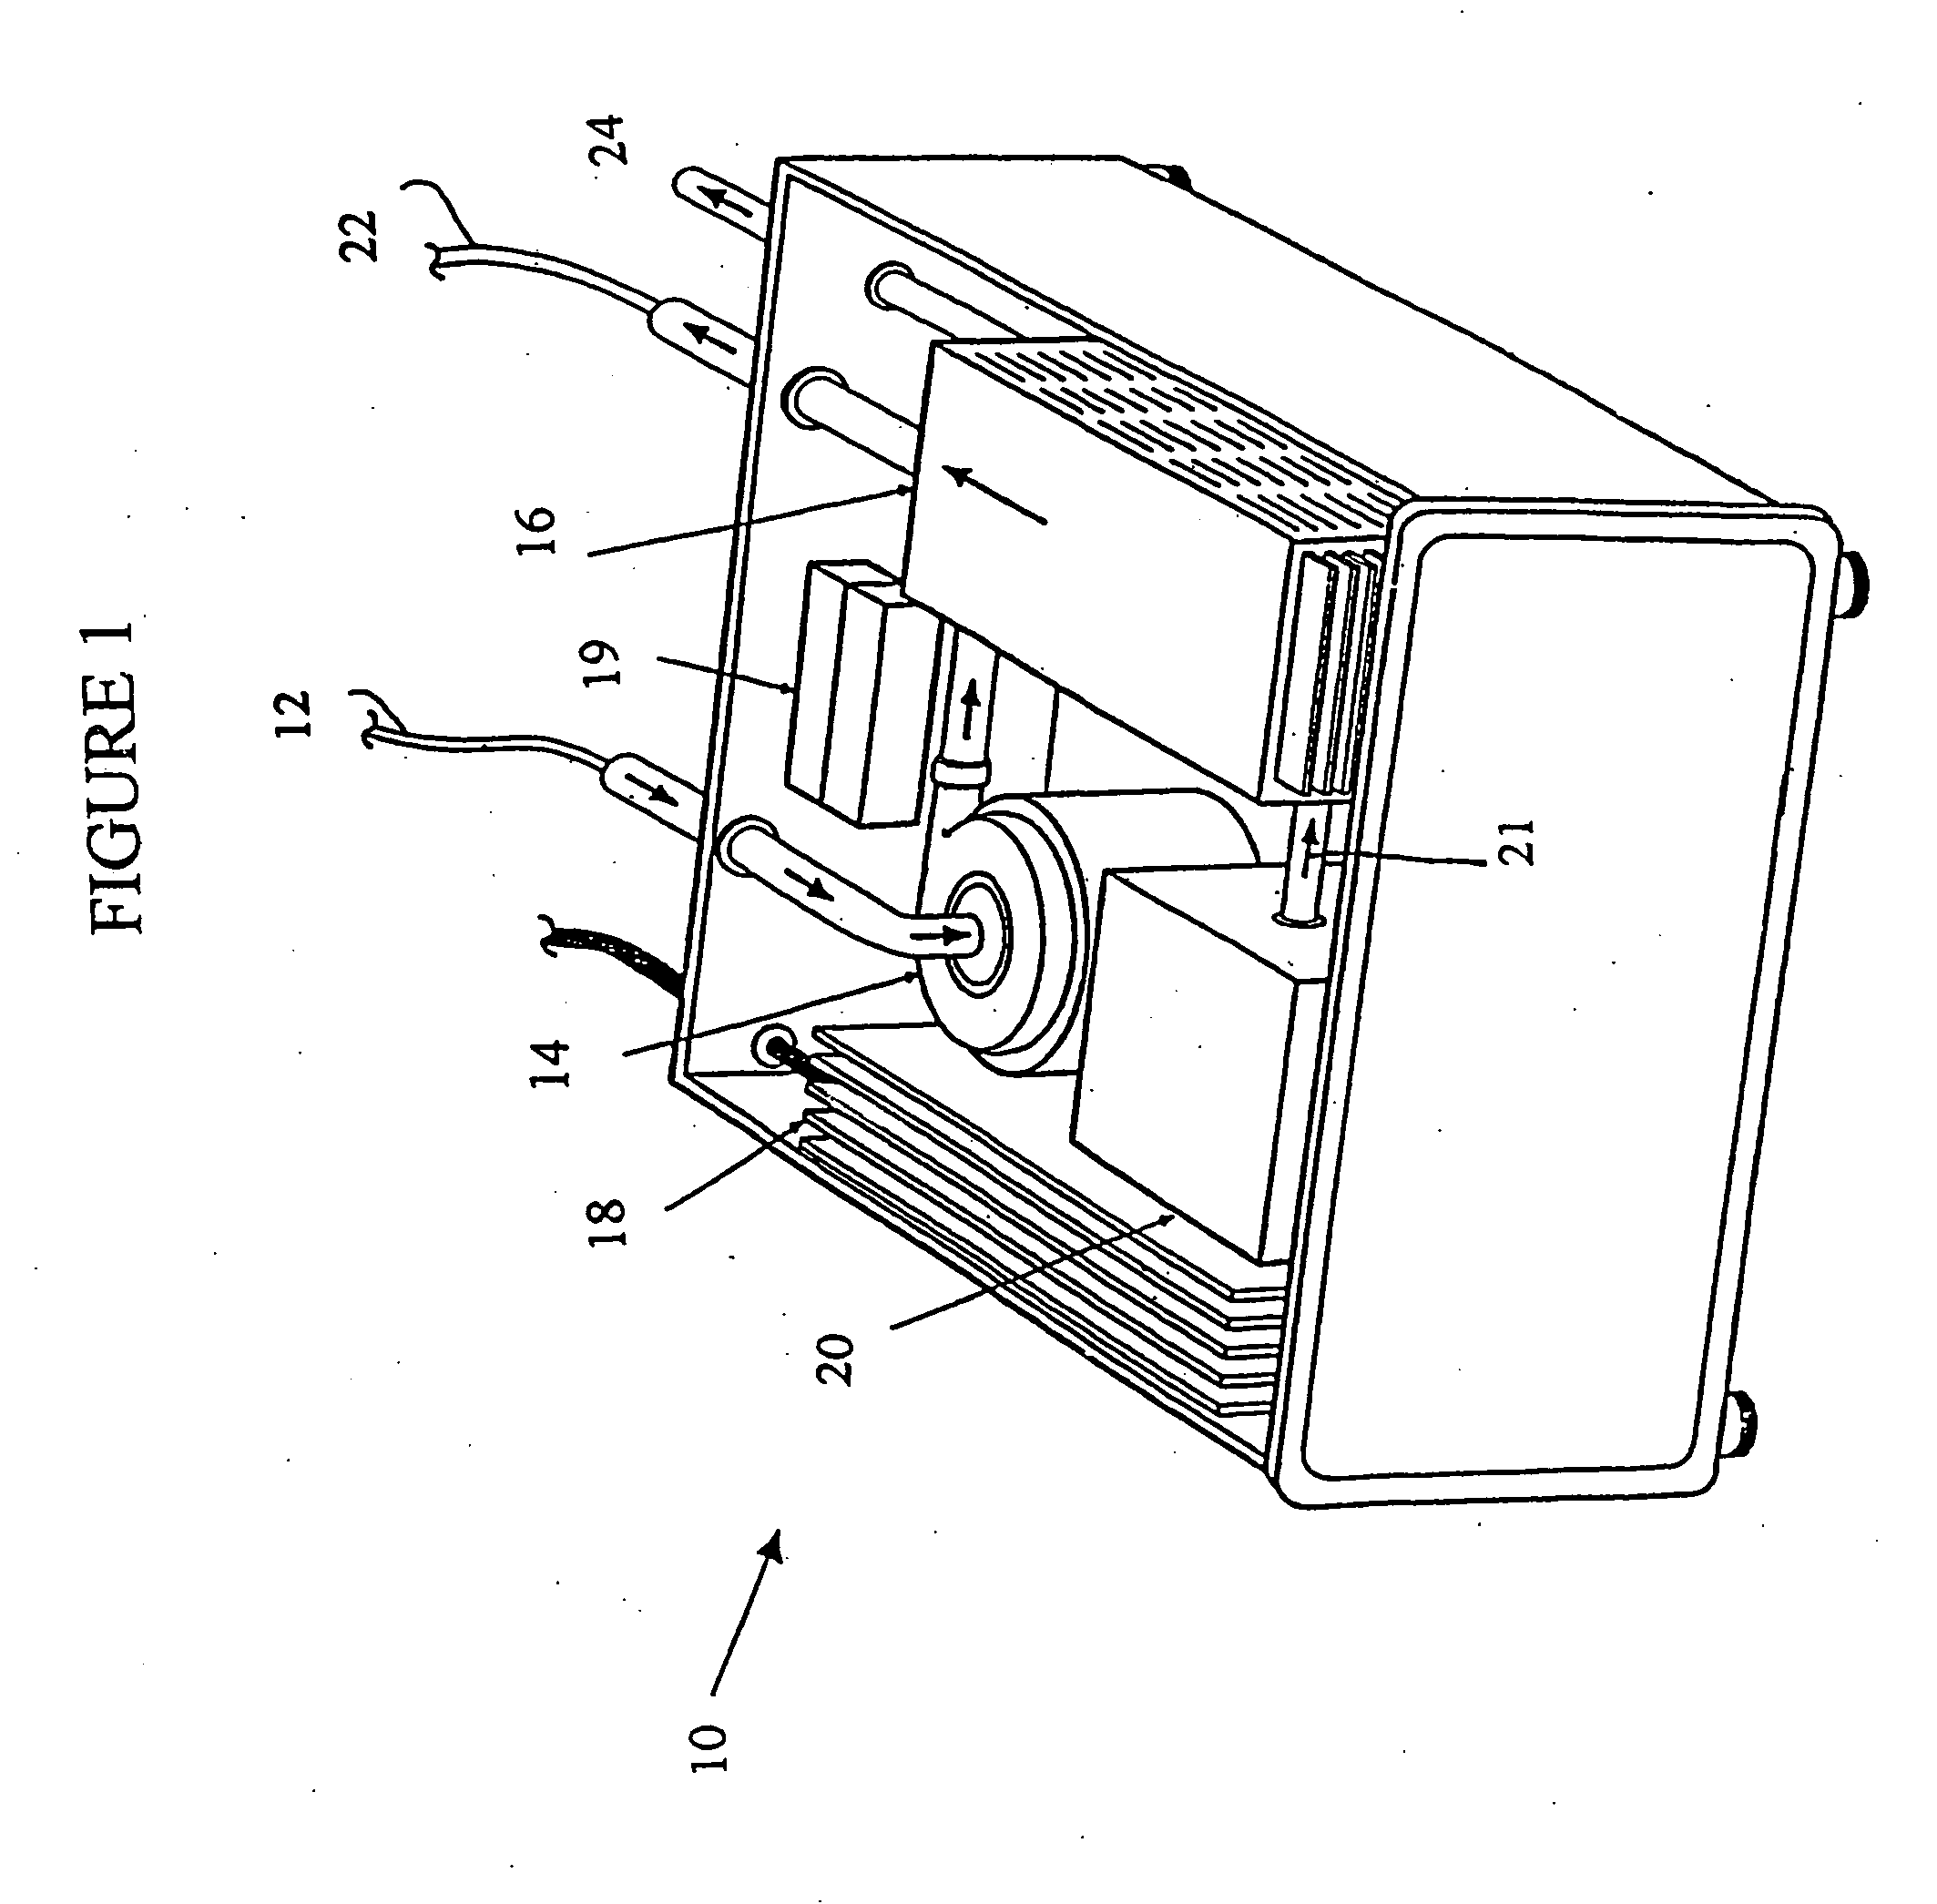 Photolytic cell for providing physiological gas exchange